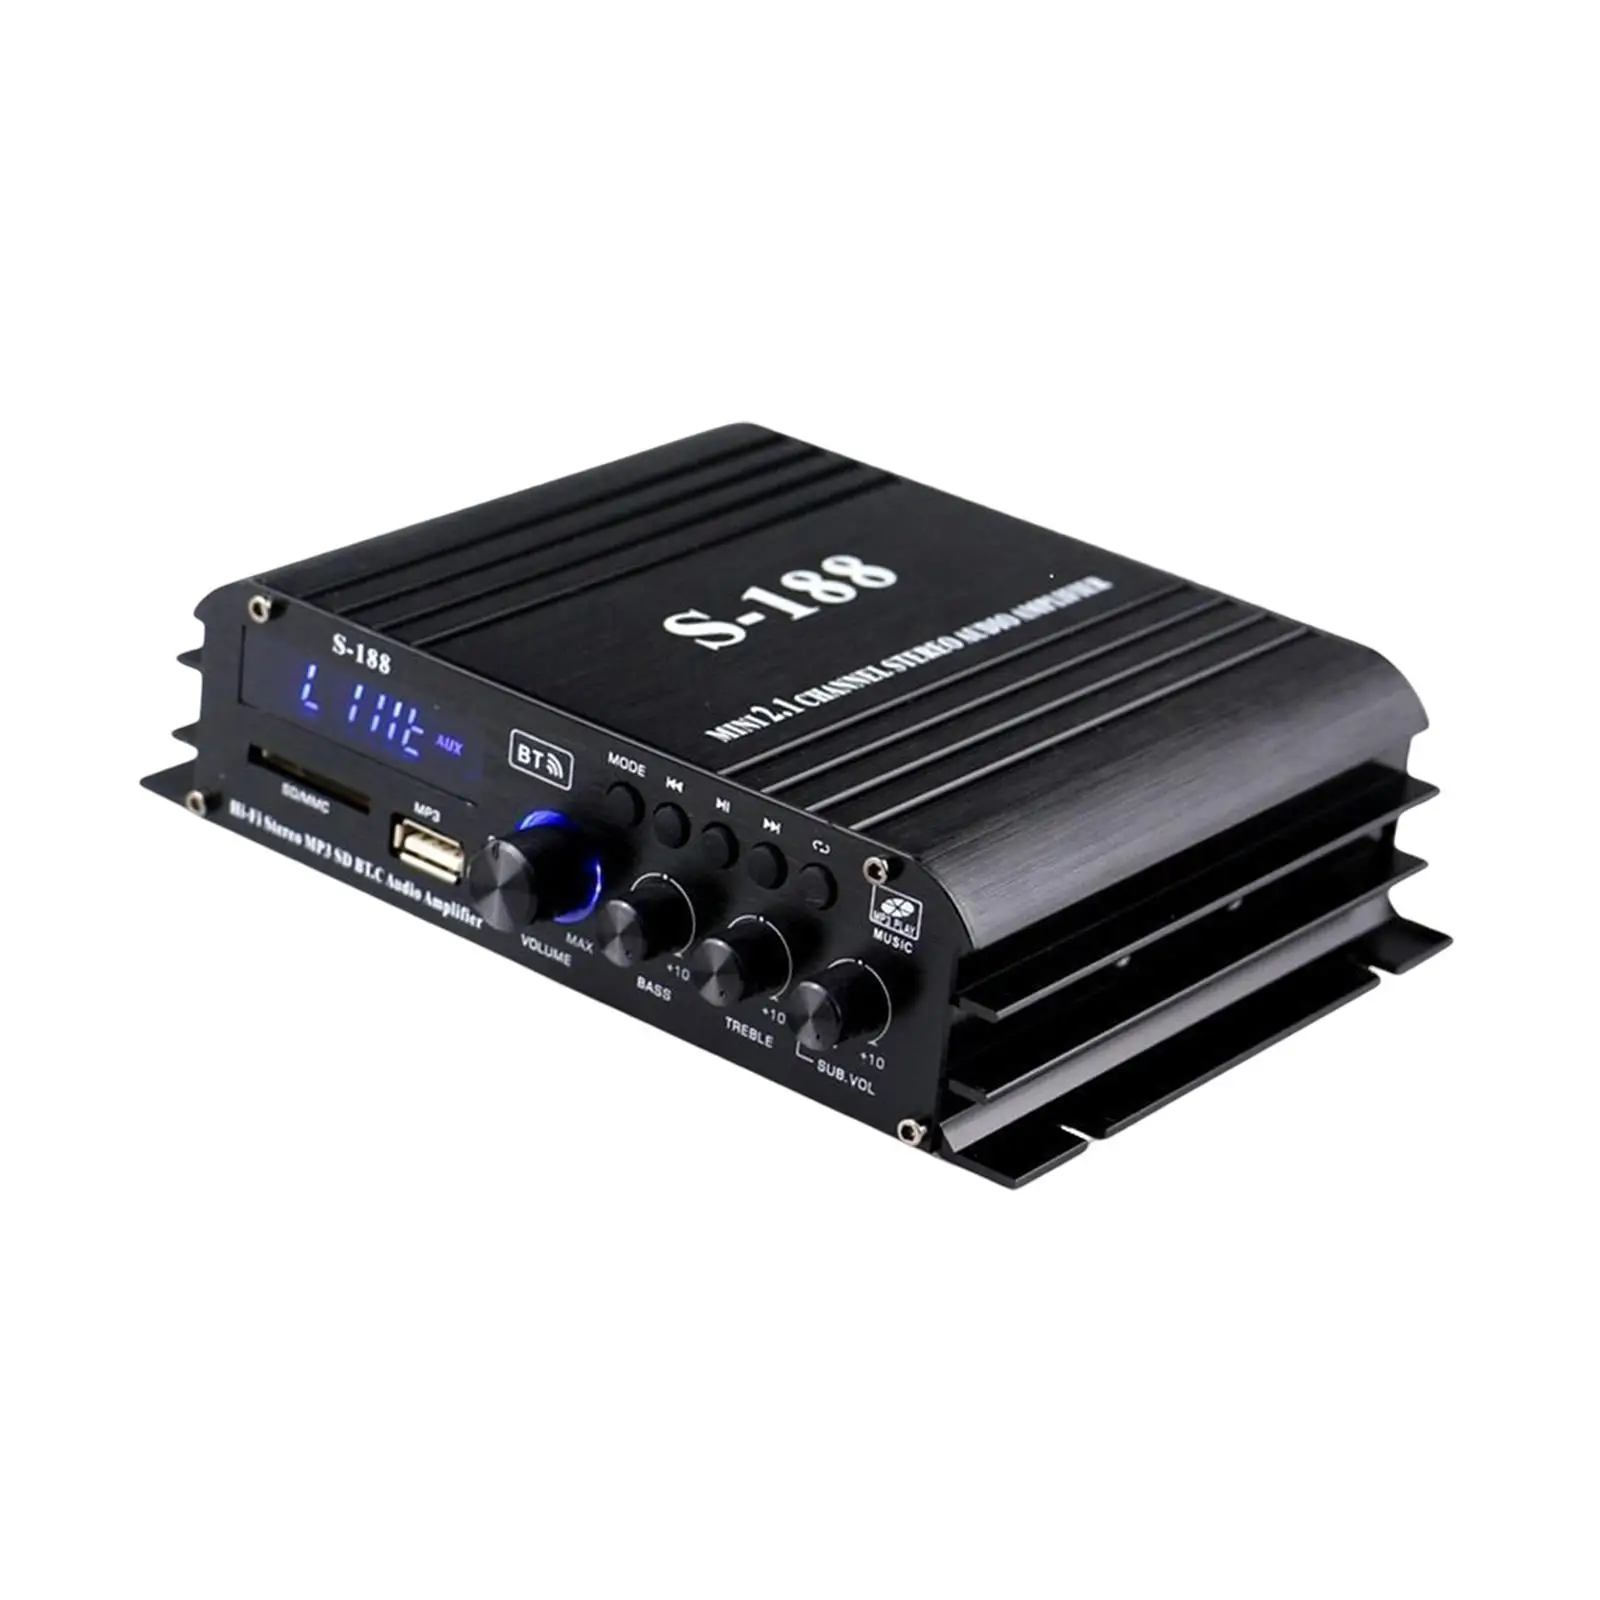 Wireless Power Amplifier 40wx2 Audio sub Bass Amp US Adapter Plug Sturdy Audio Amp Booster Amplifier with Knobs DC 12V-14V 2.1CH